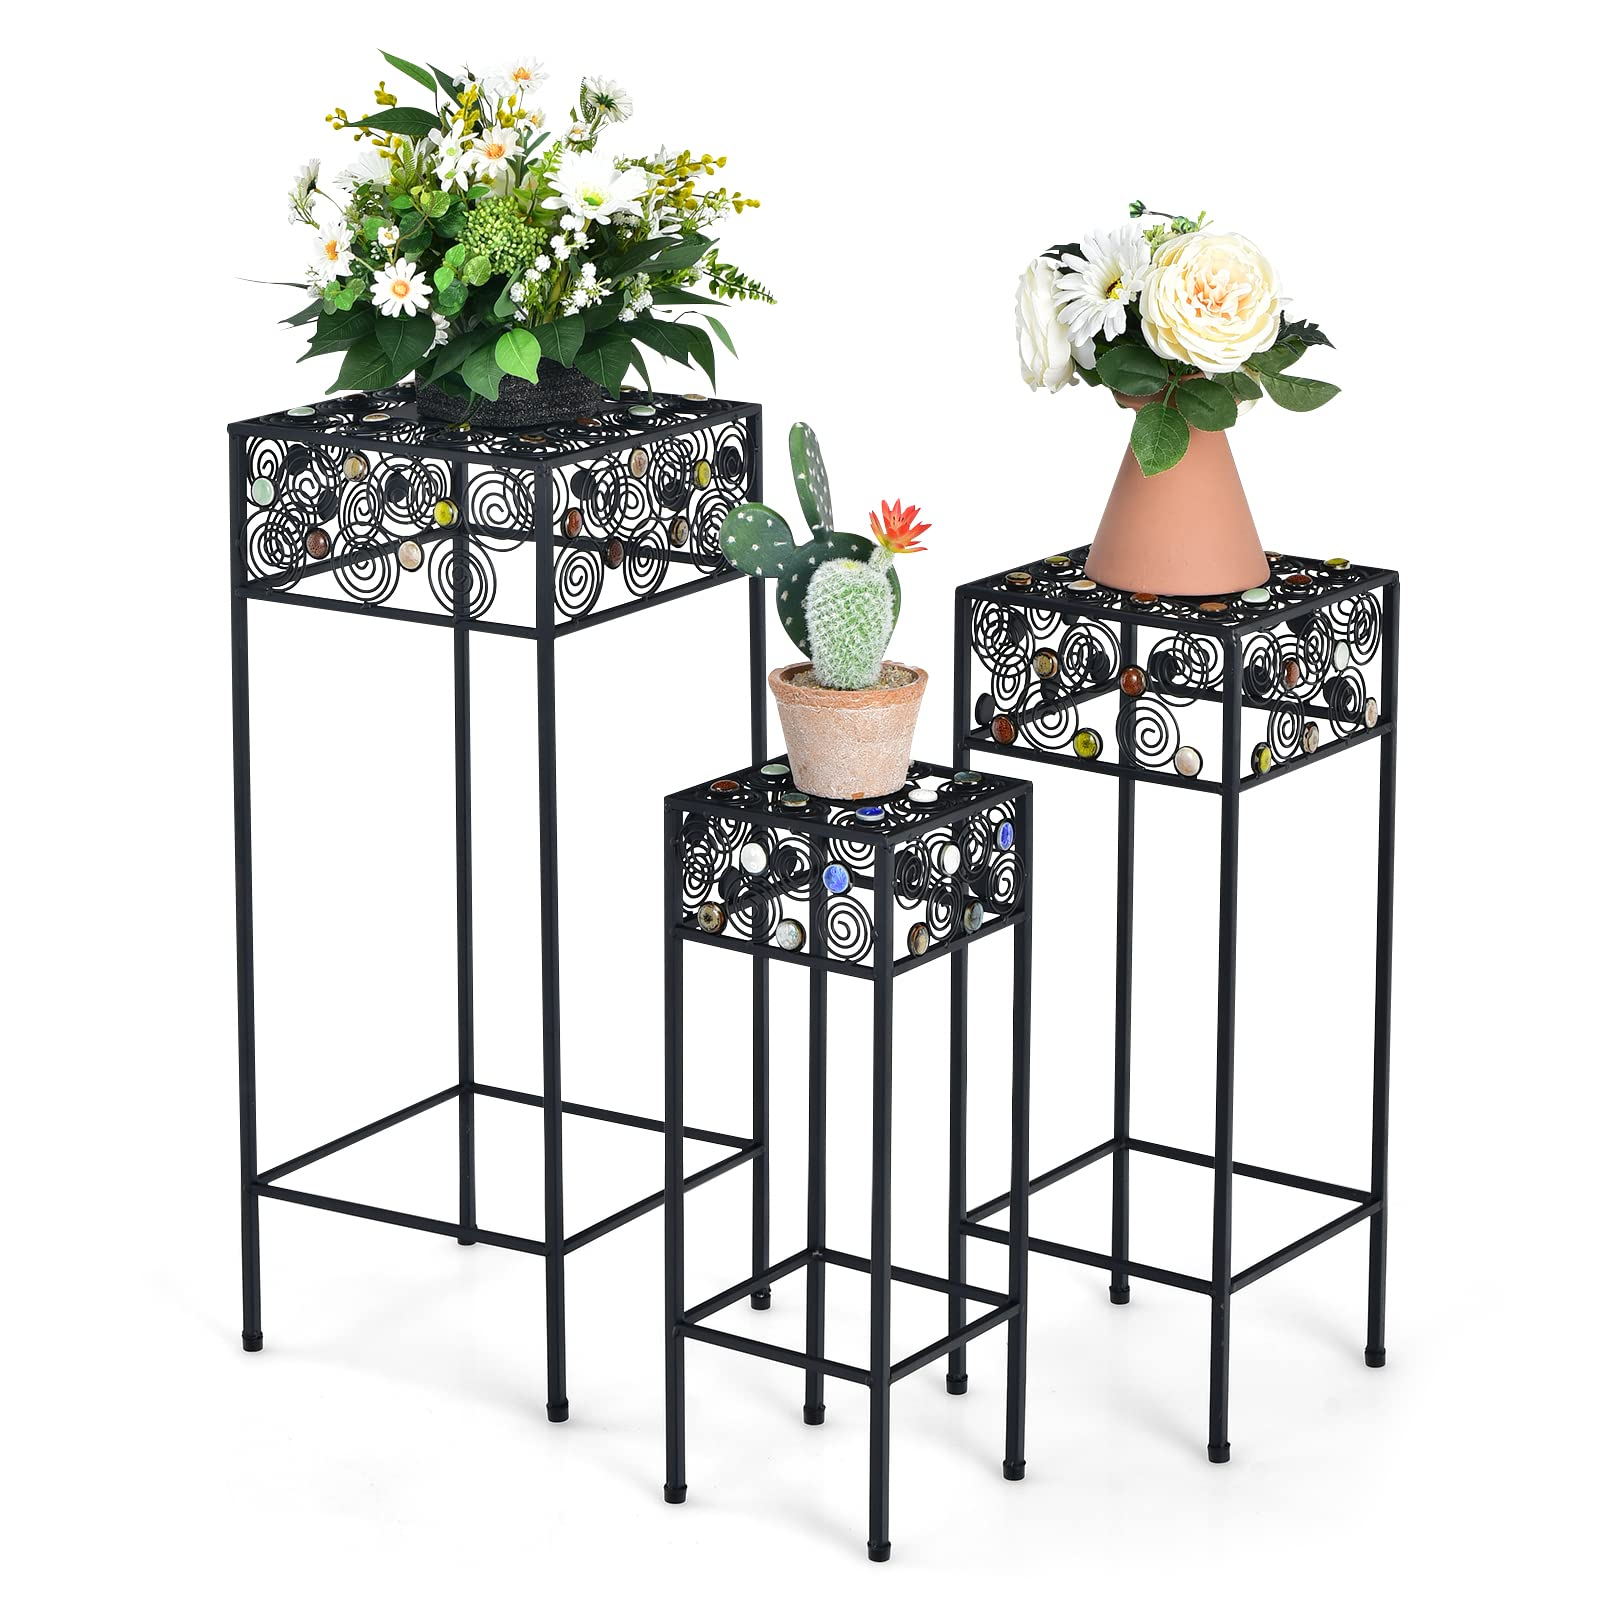 Metal Plant Stand Set of 3, Display Rack for Potted Plants with Colorful Ceramic Beads